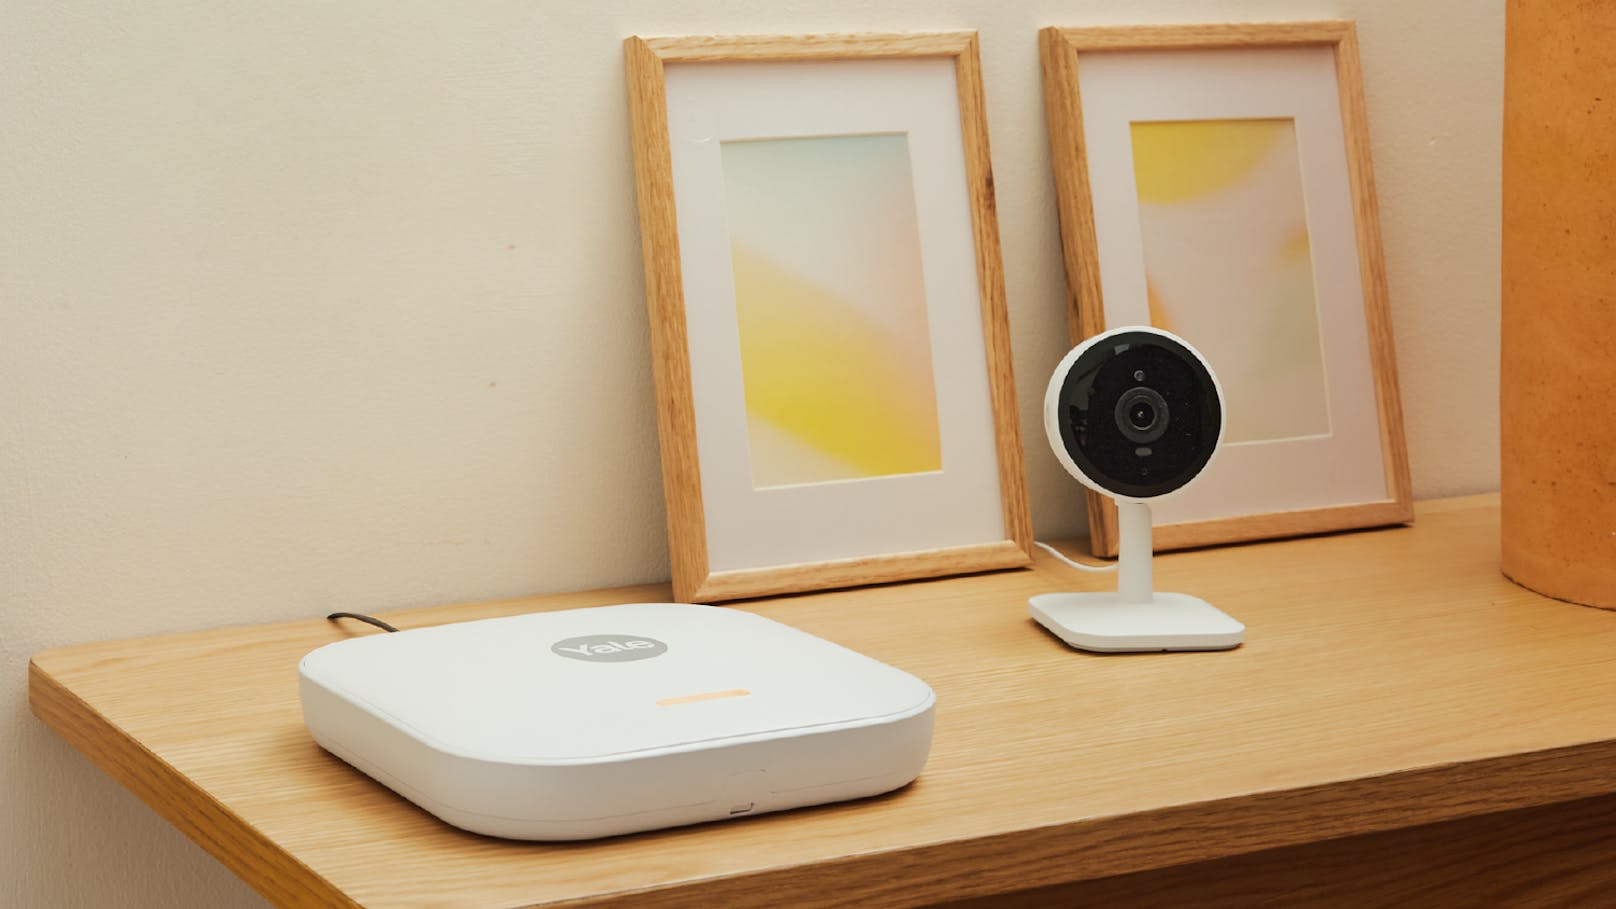 Yale launcht neue Smart Home Produkte.